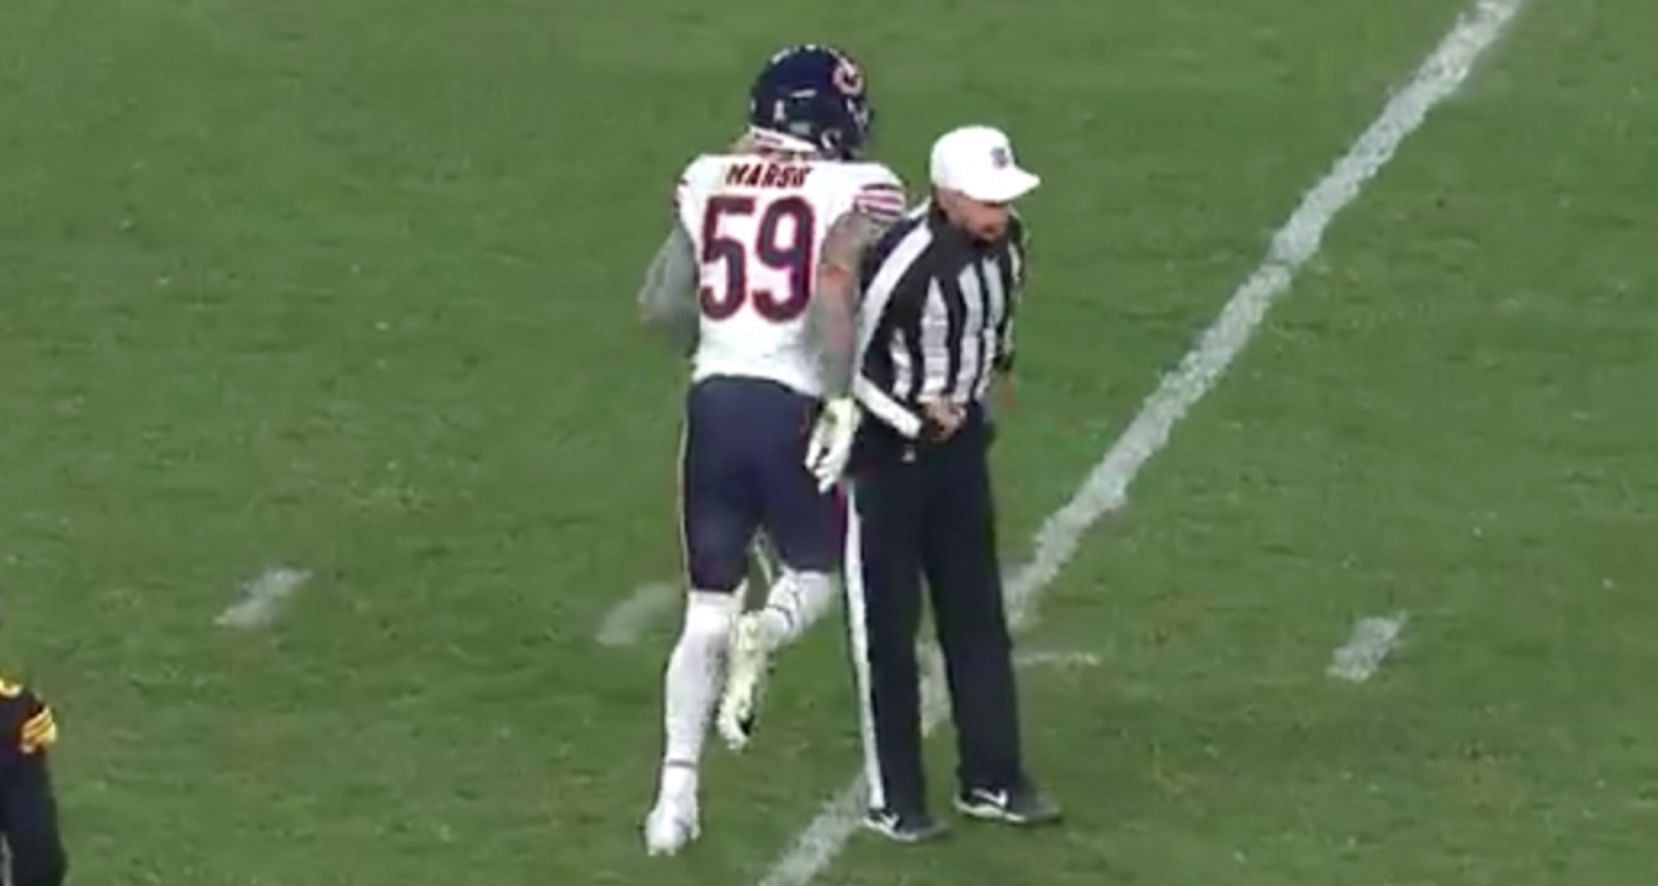 Referee Tony Corrente bumped into Cassius Marsh before throwing a flag on Marsh for taunting